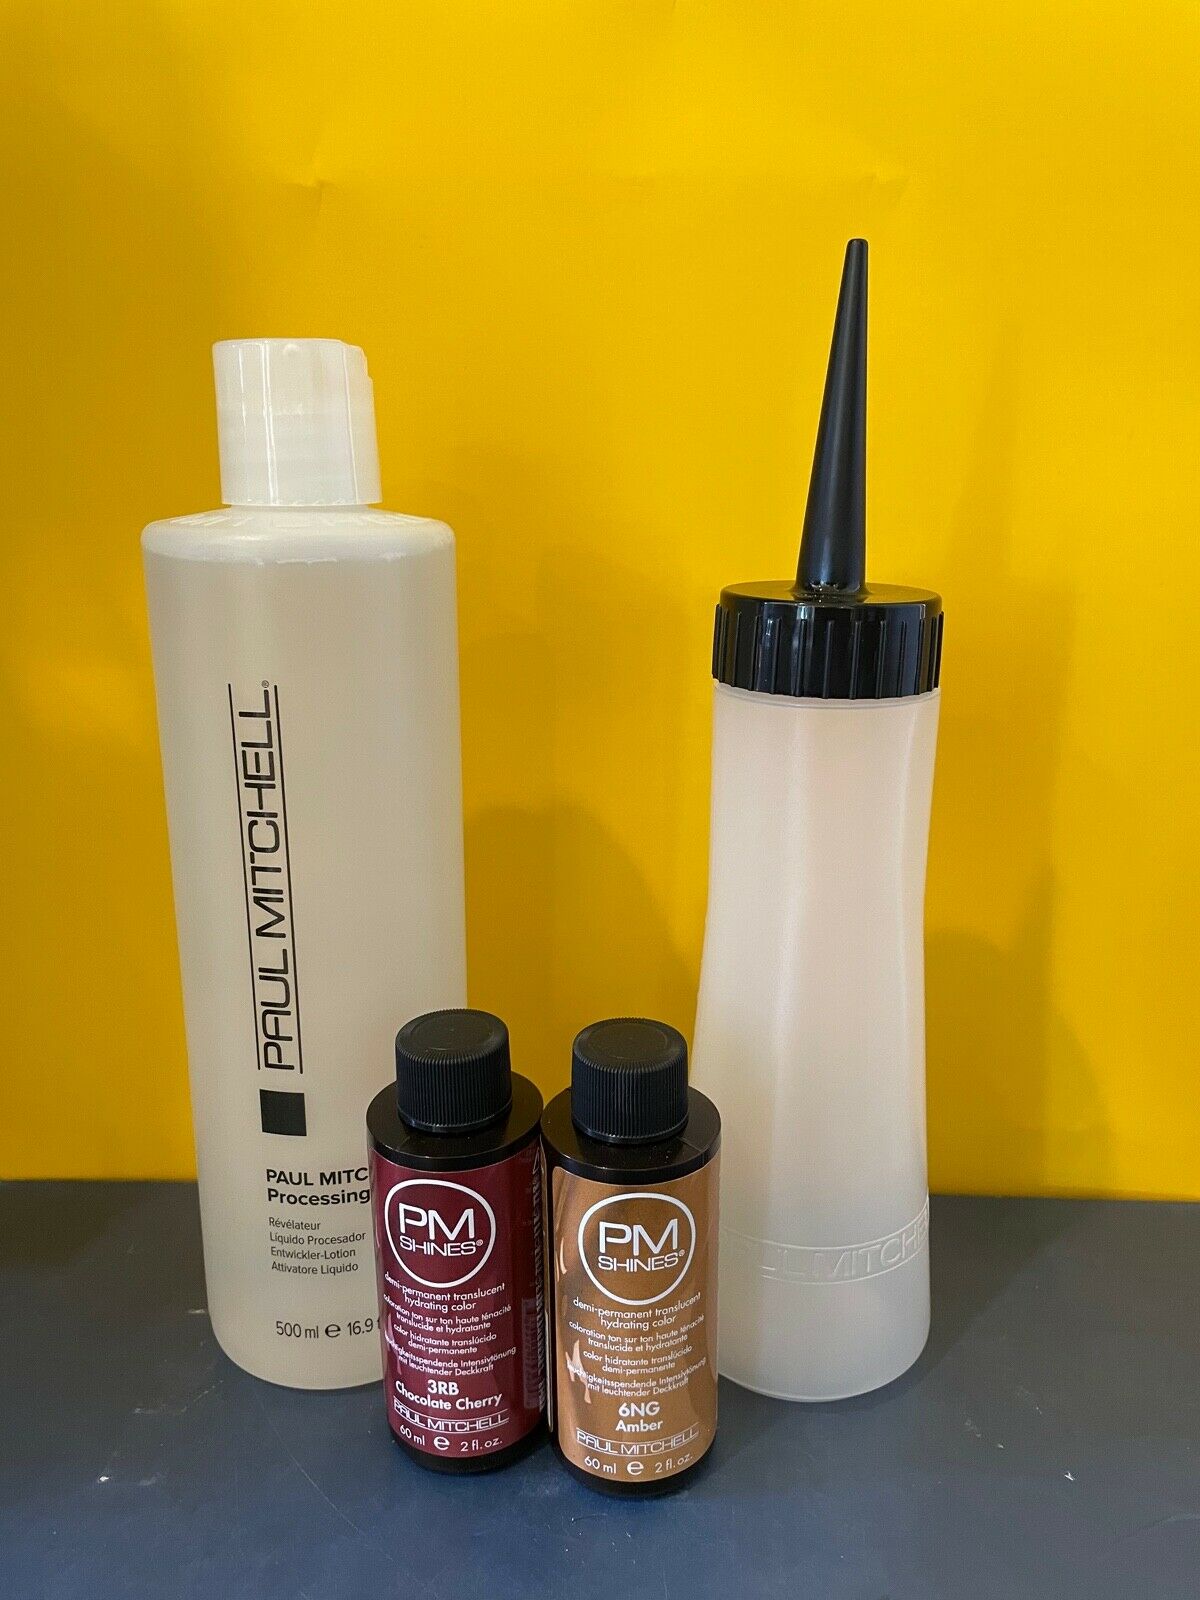 Paul Mitchell Pm Shines Demi Permanent Hair Color Or Processing Liquid